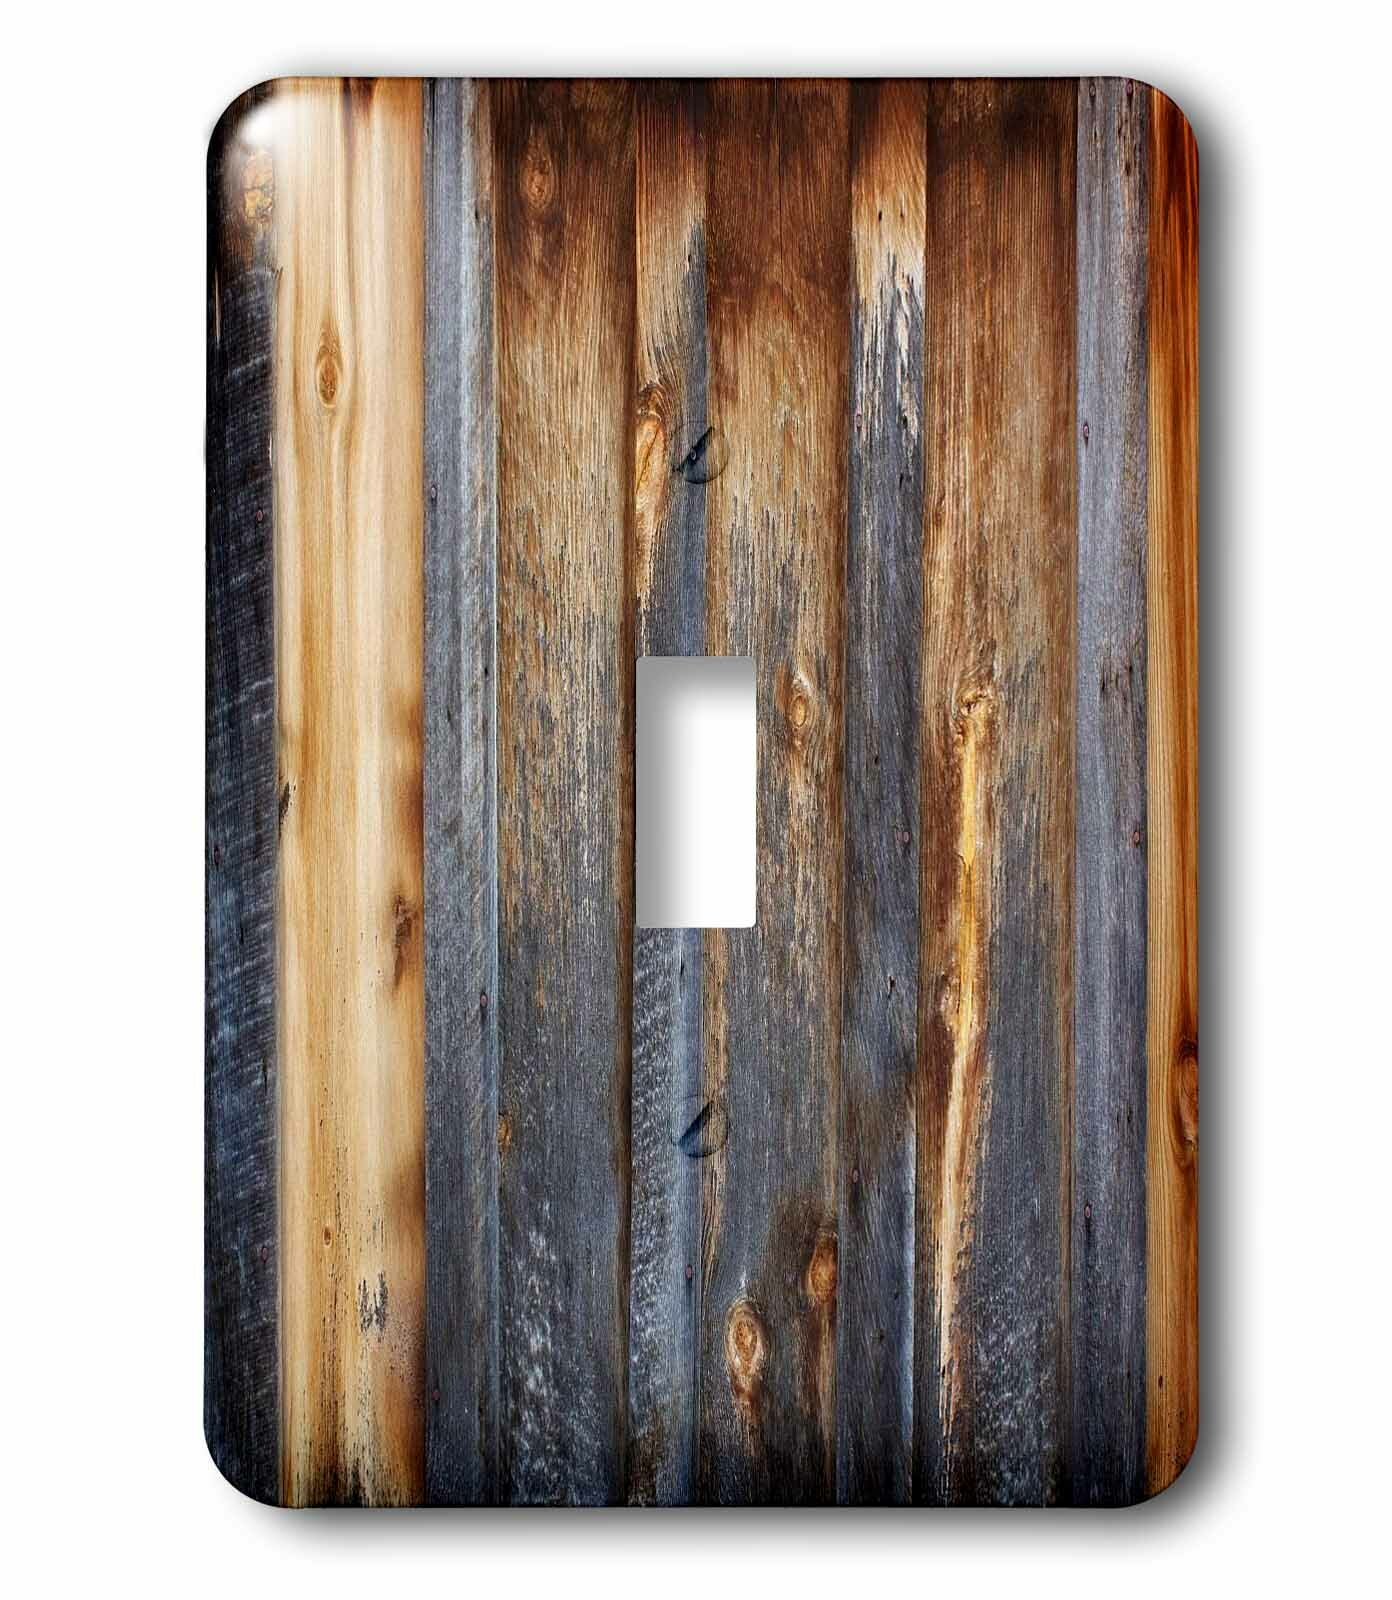 RUSTIC GREEN PAINTED CRACKED WOOD ELECTRICAL OUTLET WALL PLATE COUNTRY CABIN ART 